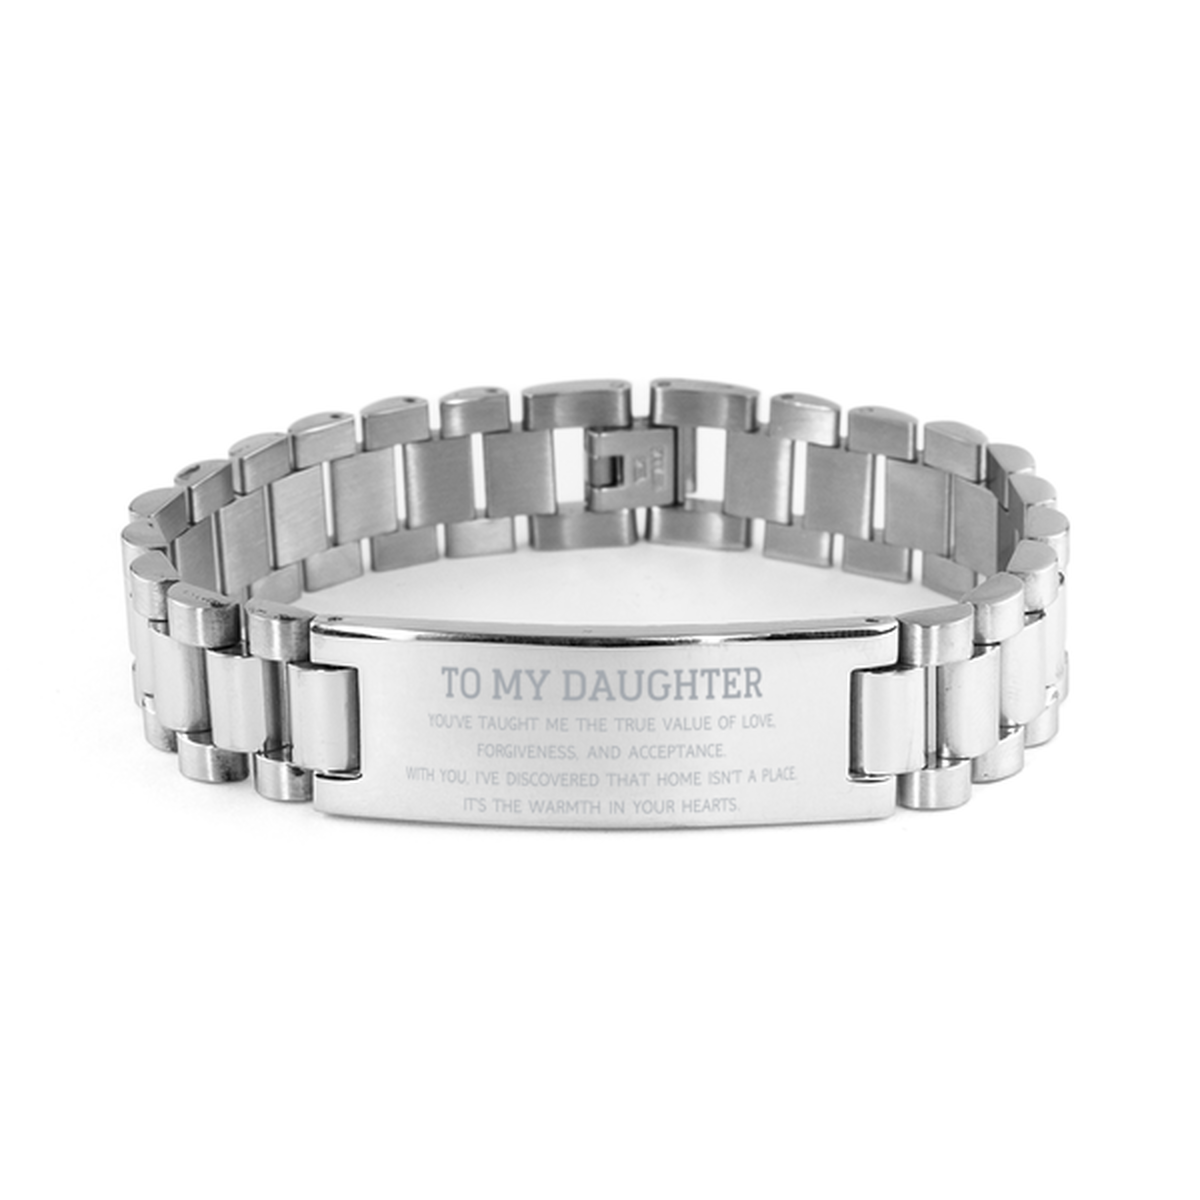 To My Daughter Gifts, You've taught me the true value of love, Thank You Gifts For Daughter, Birthday Ladder Stainless Steel Bracelet For Daughter